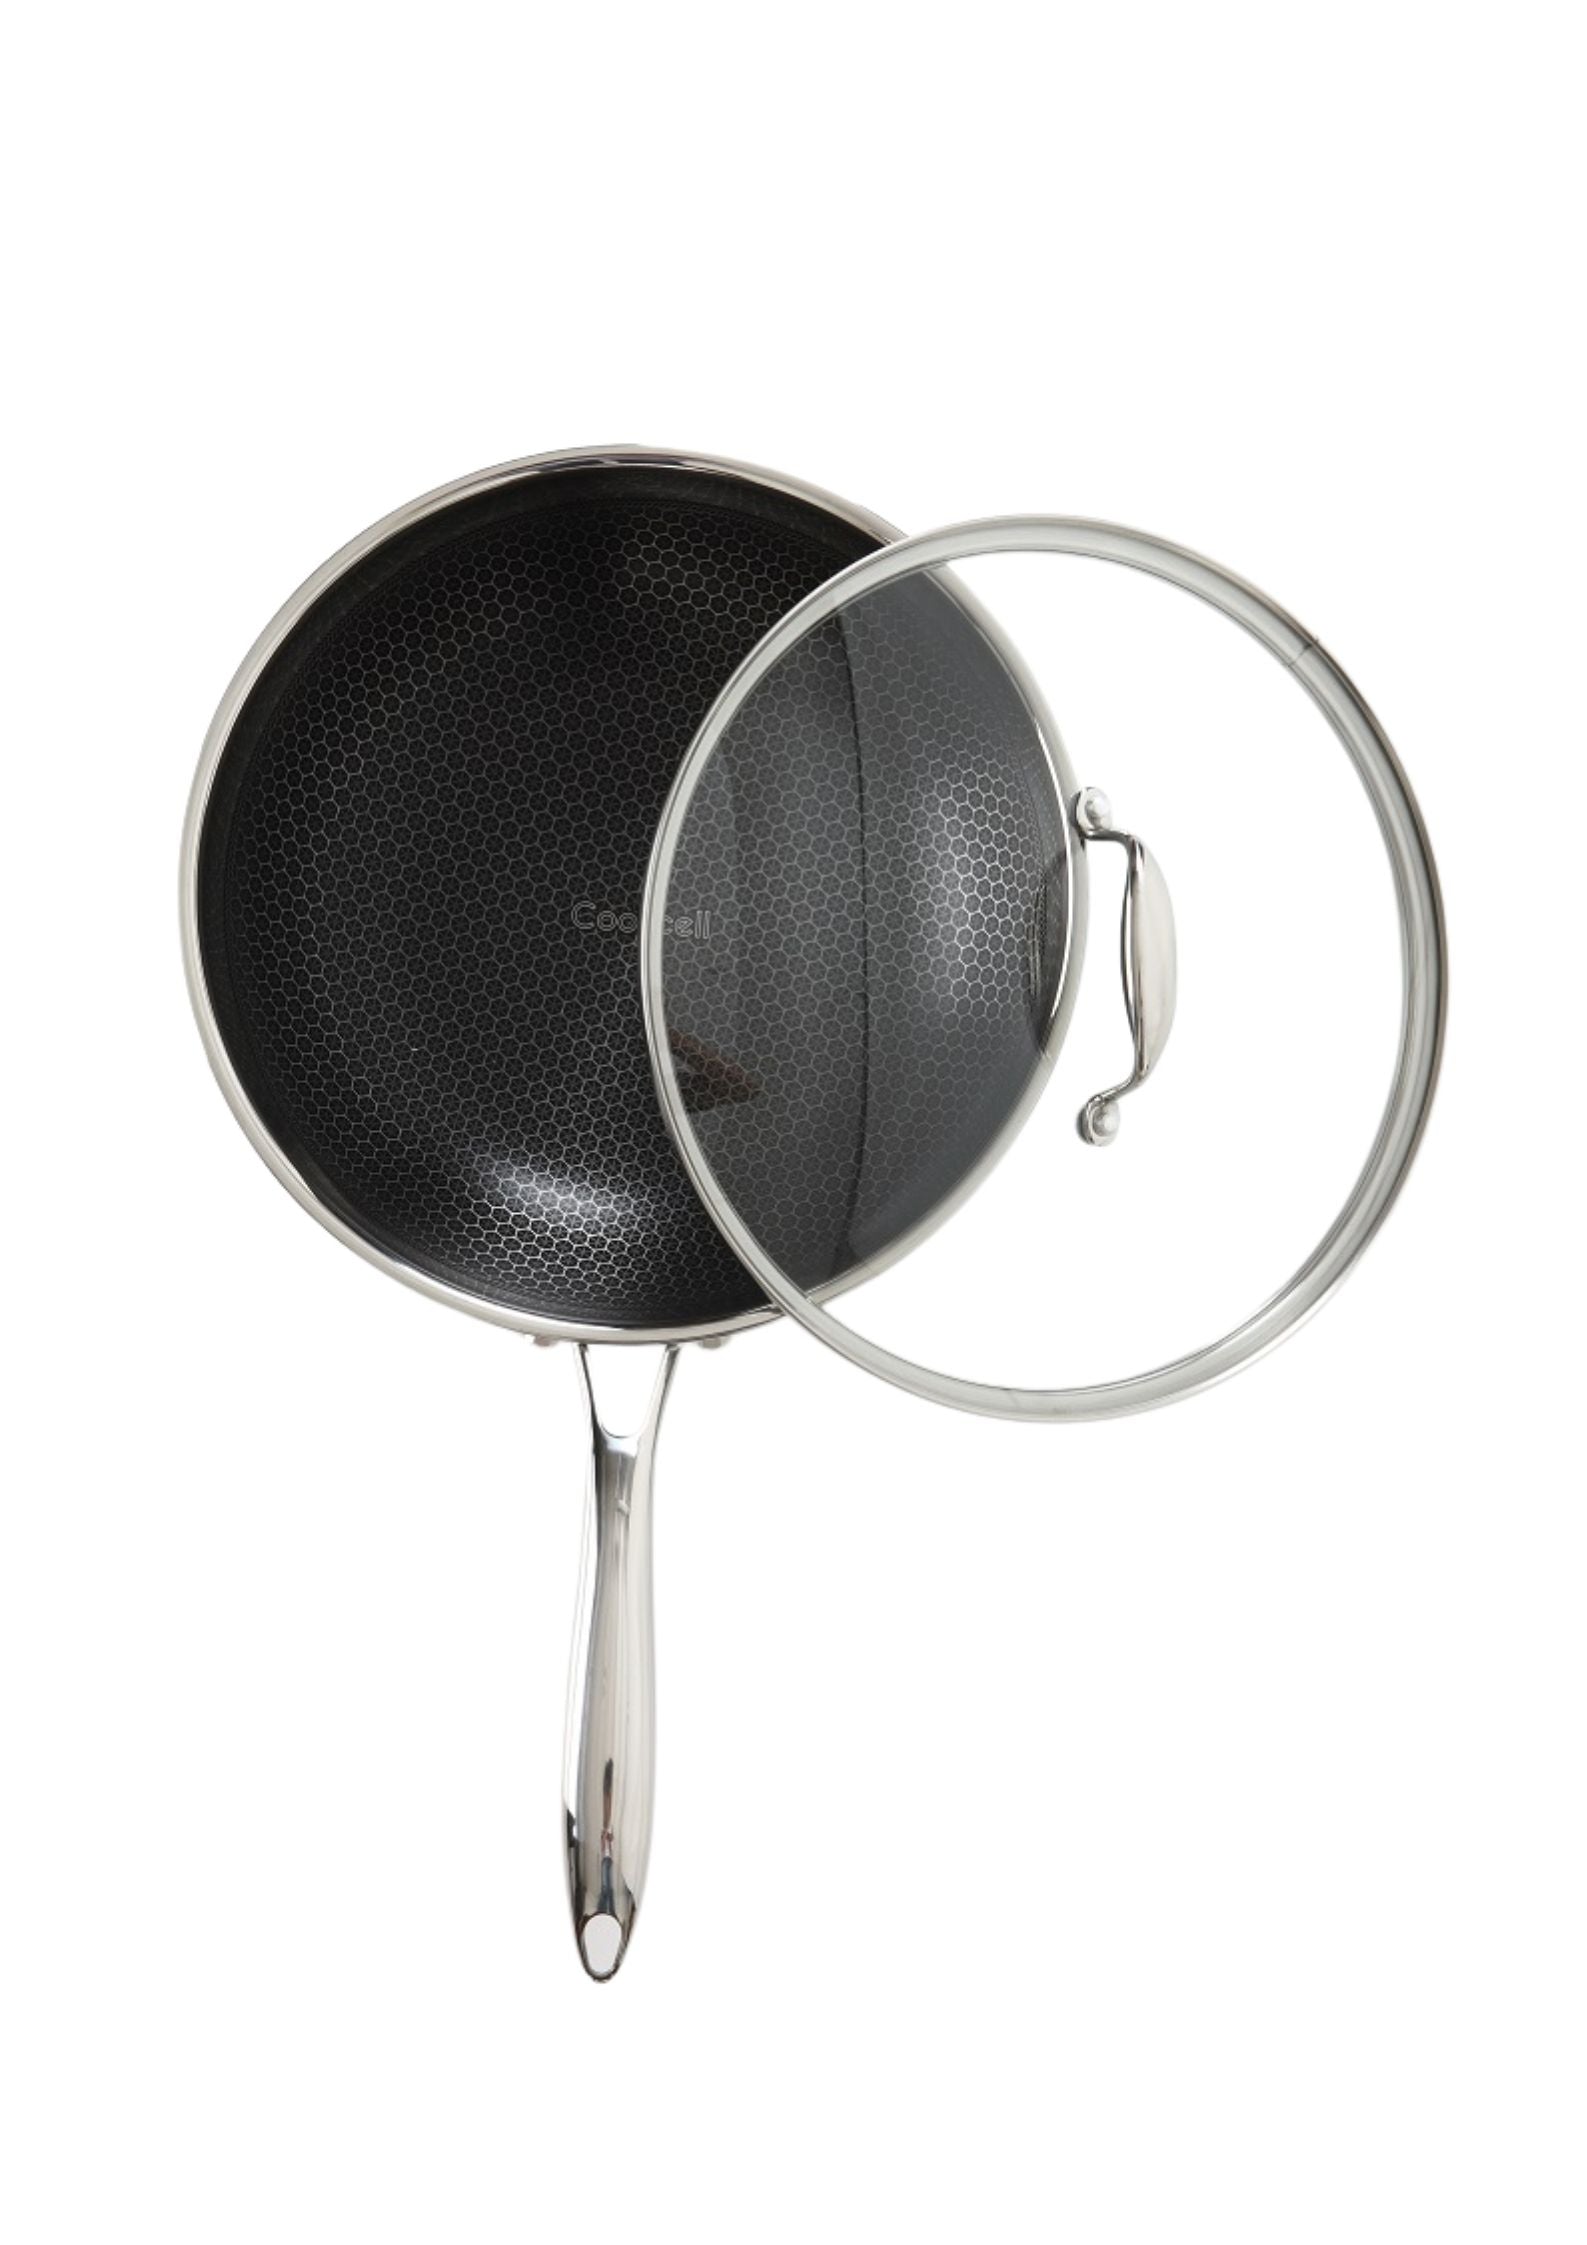 COOKCELL Stainless Steel Non-stick Hybrid Wok 32cm